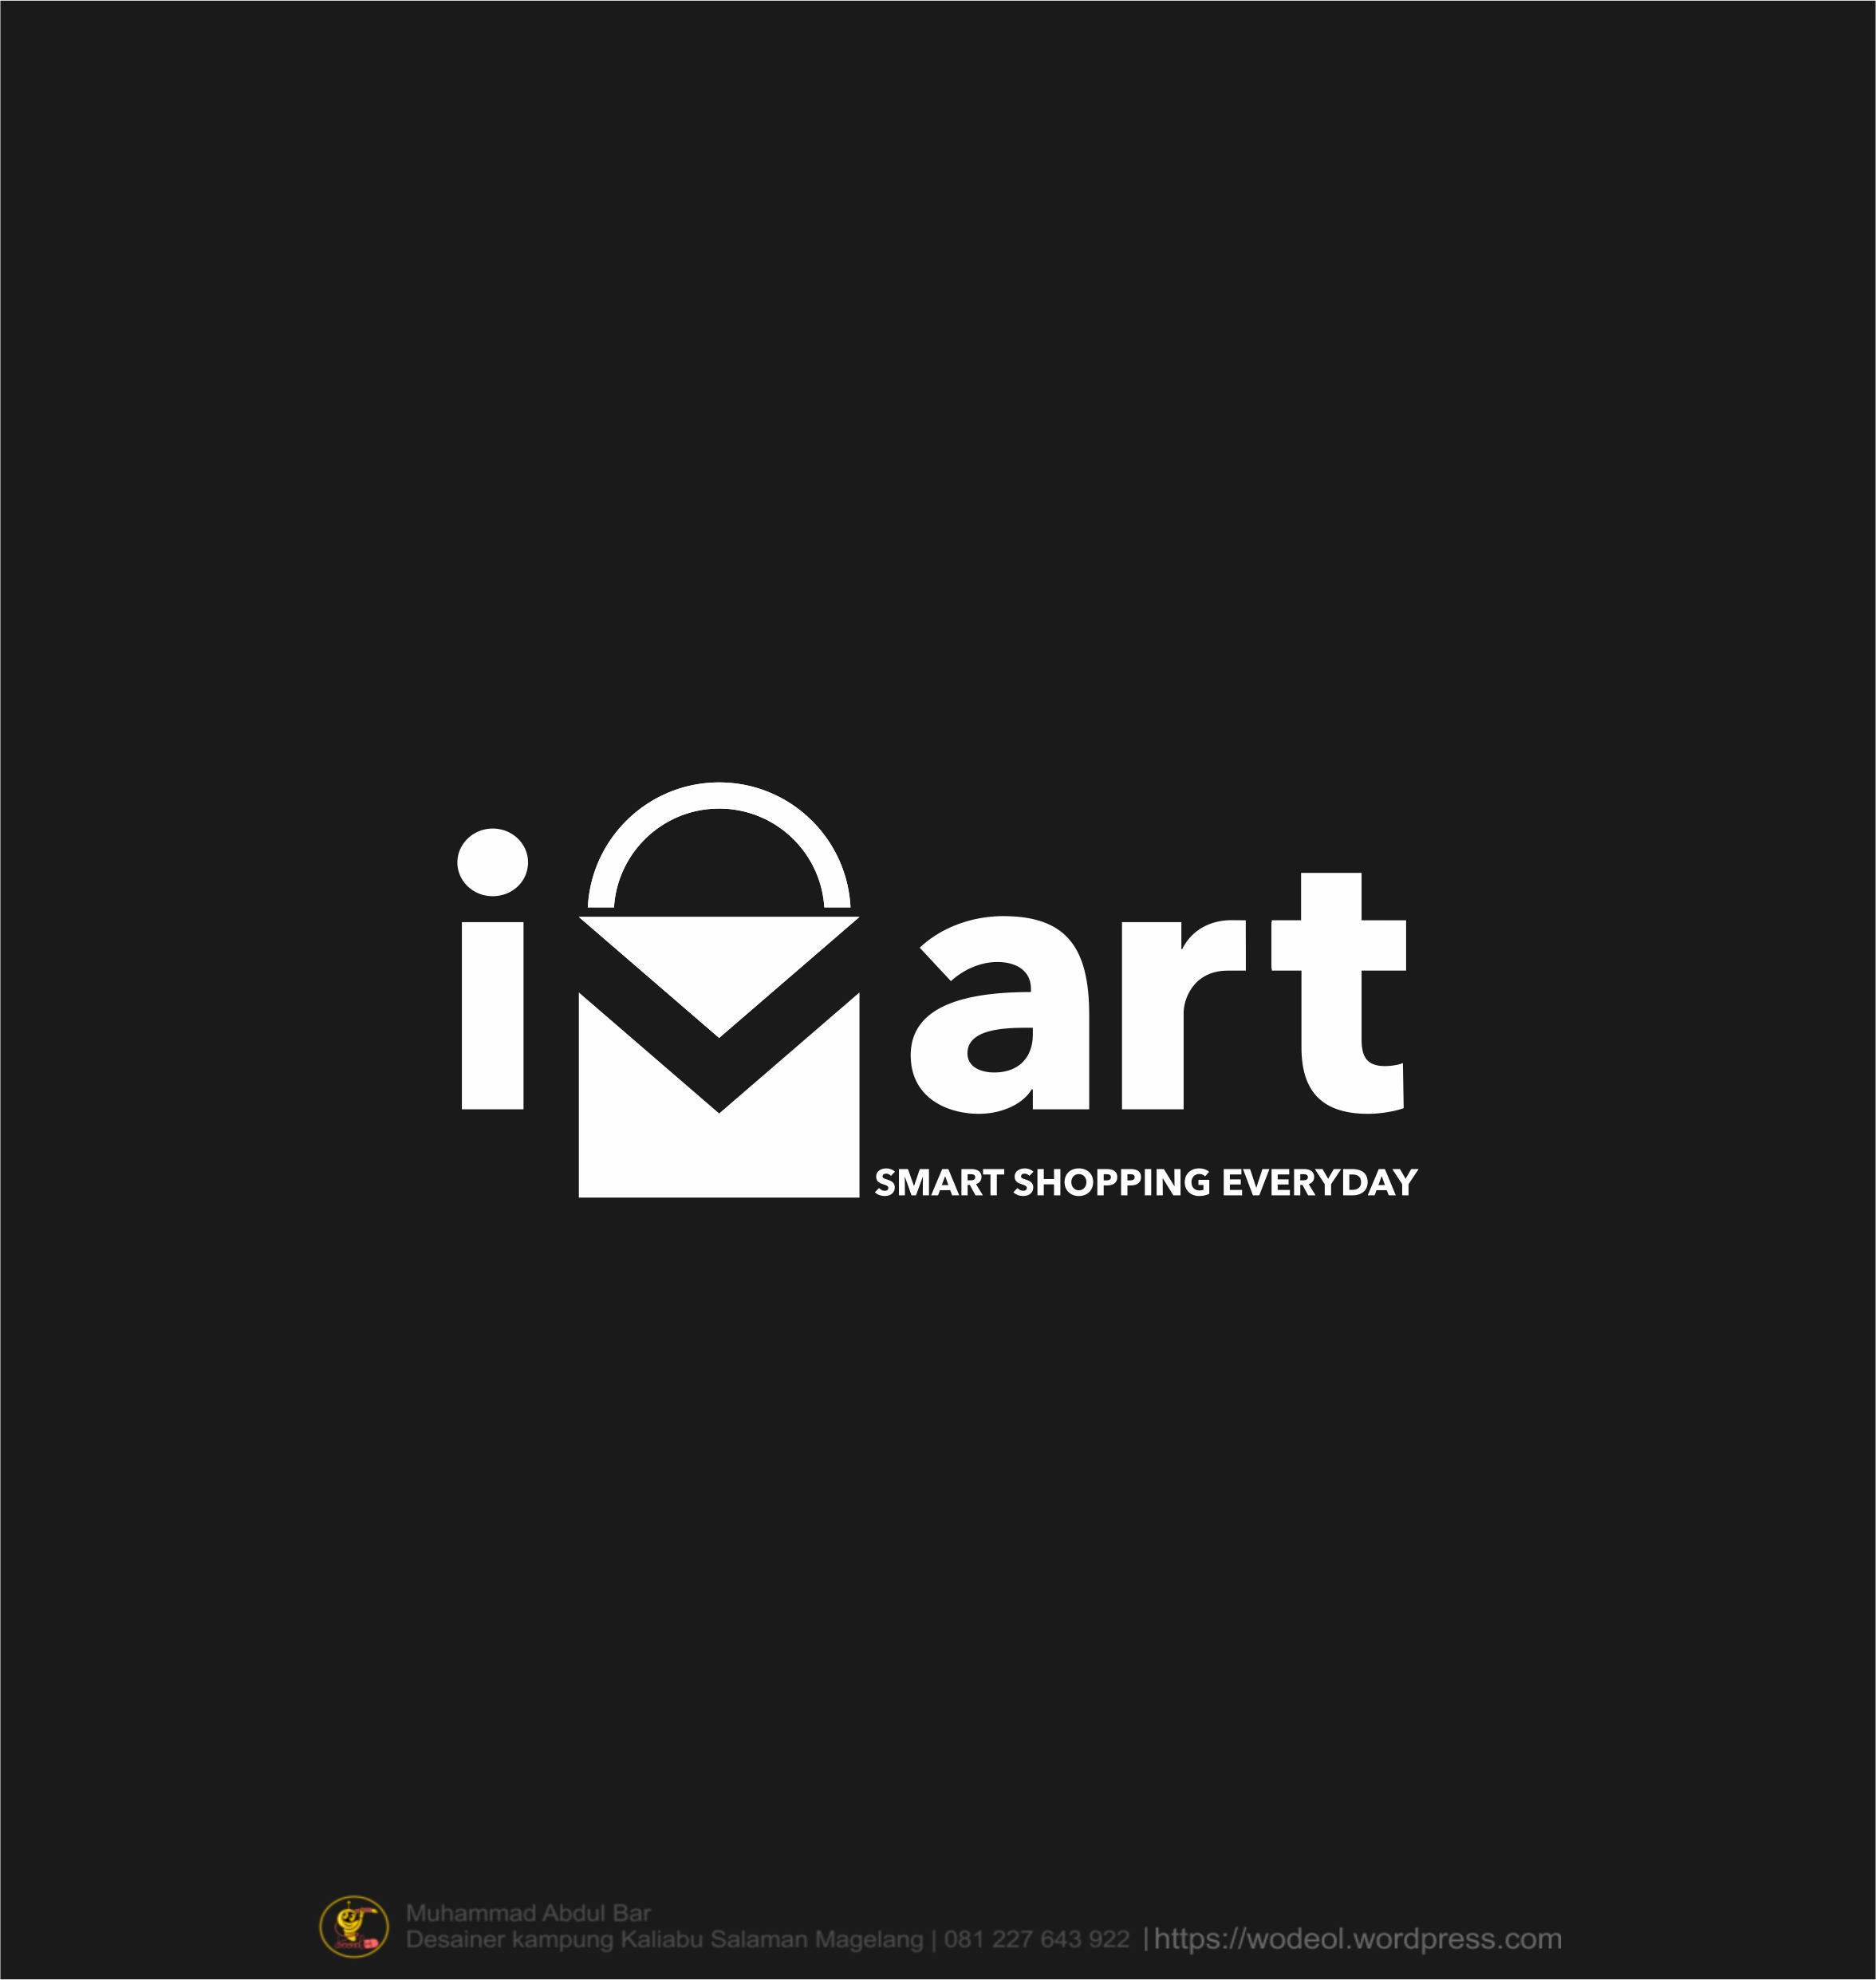 IMART____. My every day shopping